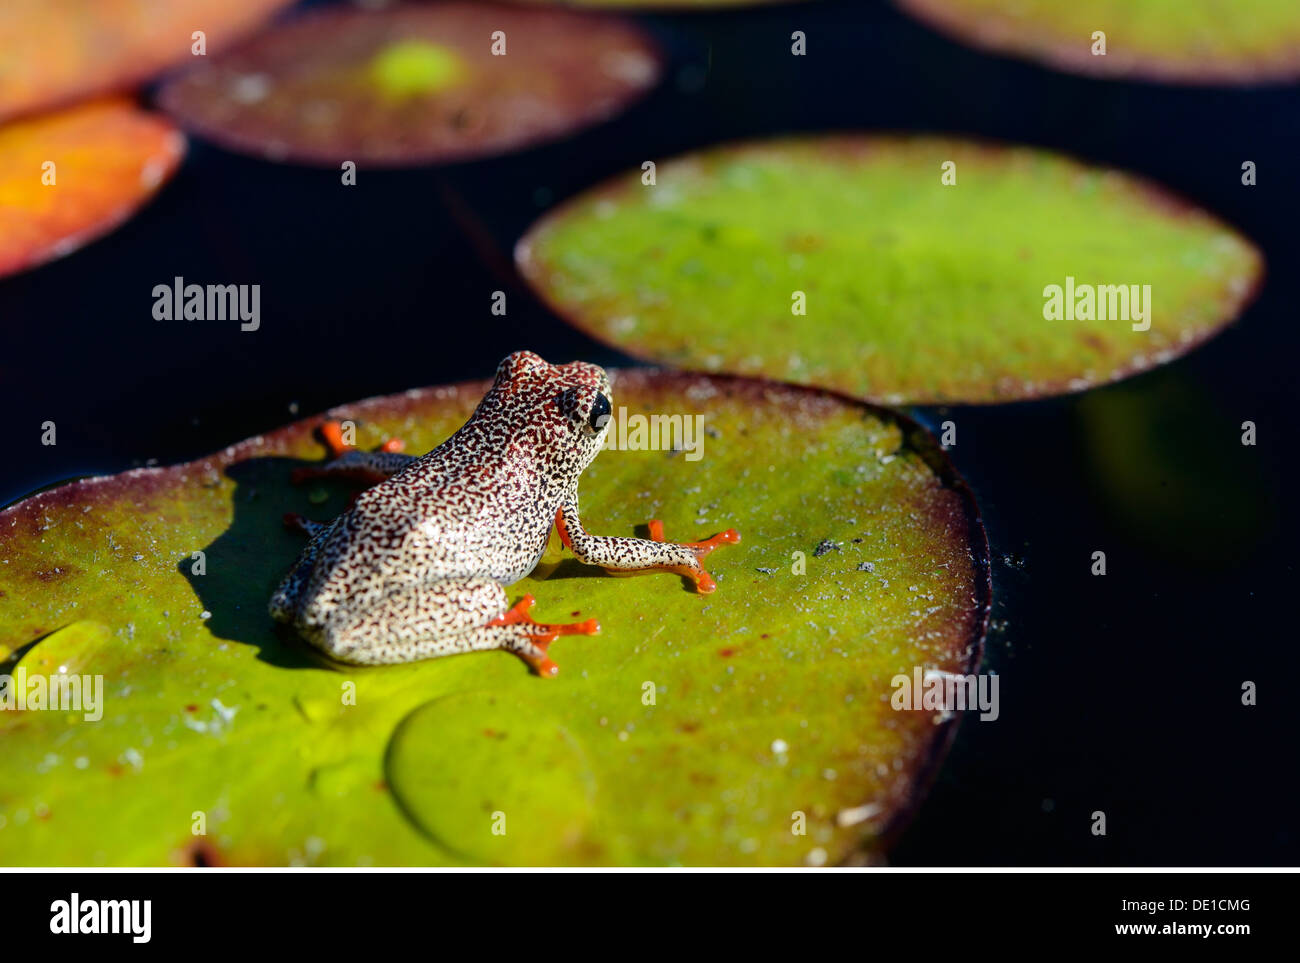 zoology / animals, amphibian, sedge frog (Hyperoliidae), PomPom, African Reed frog (Hyperolius marmoratus), Okavango delta, Botswana, Southern Africa, Additional-Rights-Clearance-Info-Not-Available Stock Photo